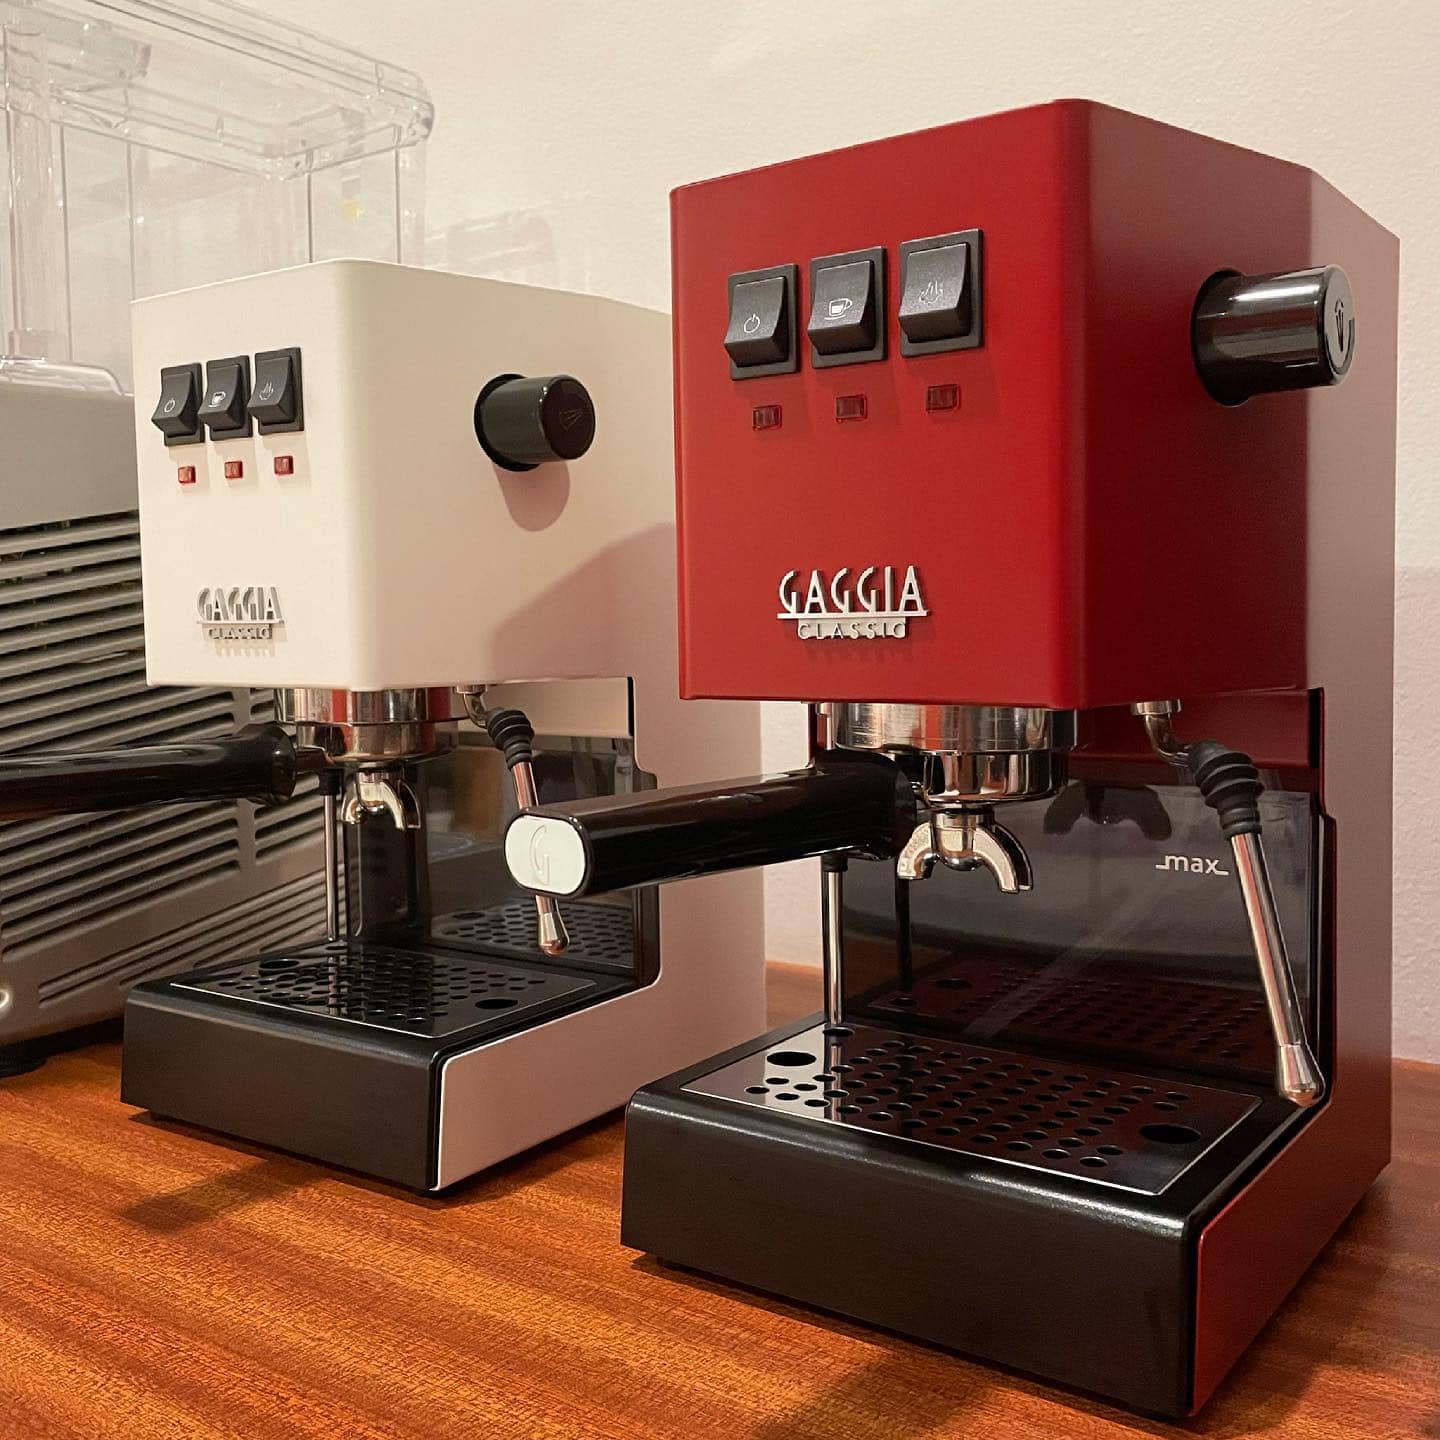 Gaggia Classic Pro is equipped with a 71oz water tank